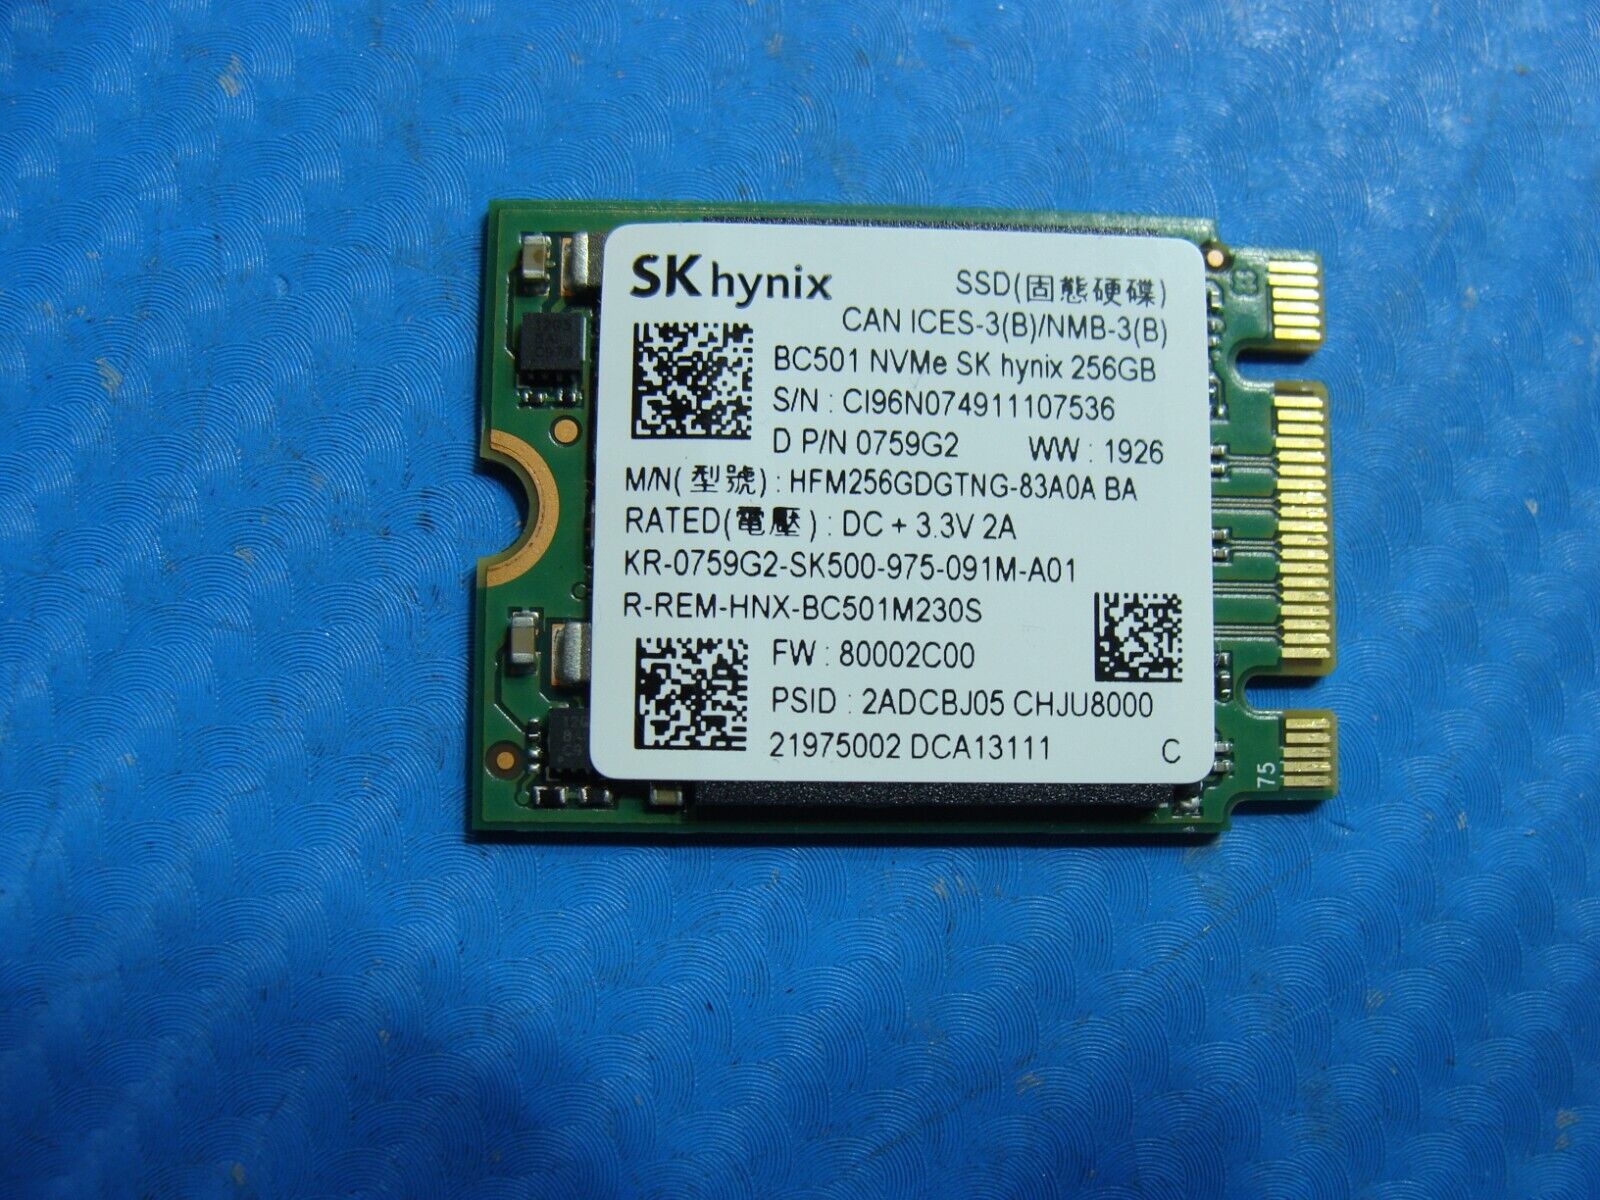 Dell 3583 SK Hynix 256GB NVMe M.2 SSD Solid State Drive 759G2 HFM256GDGTNG-83A0A